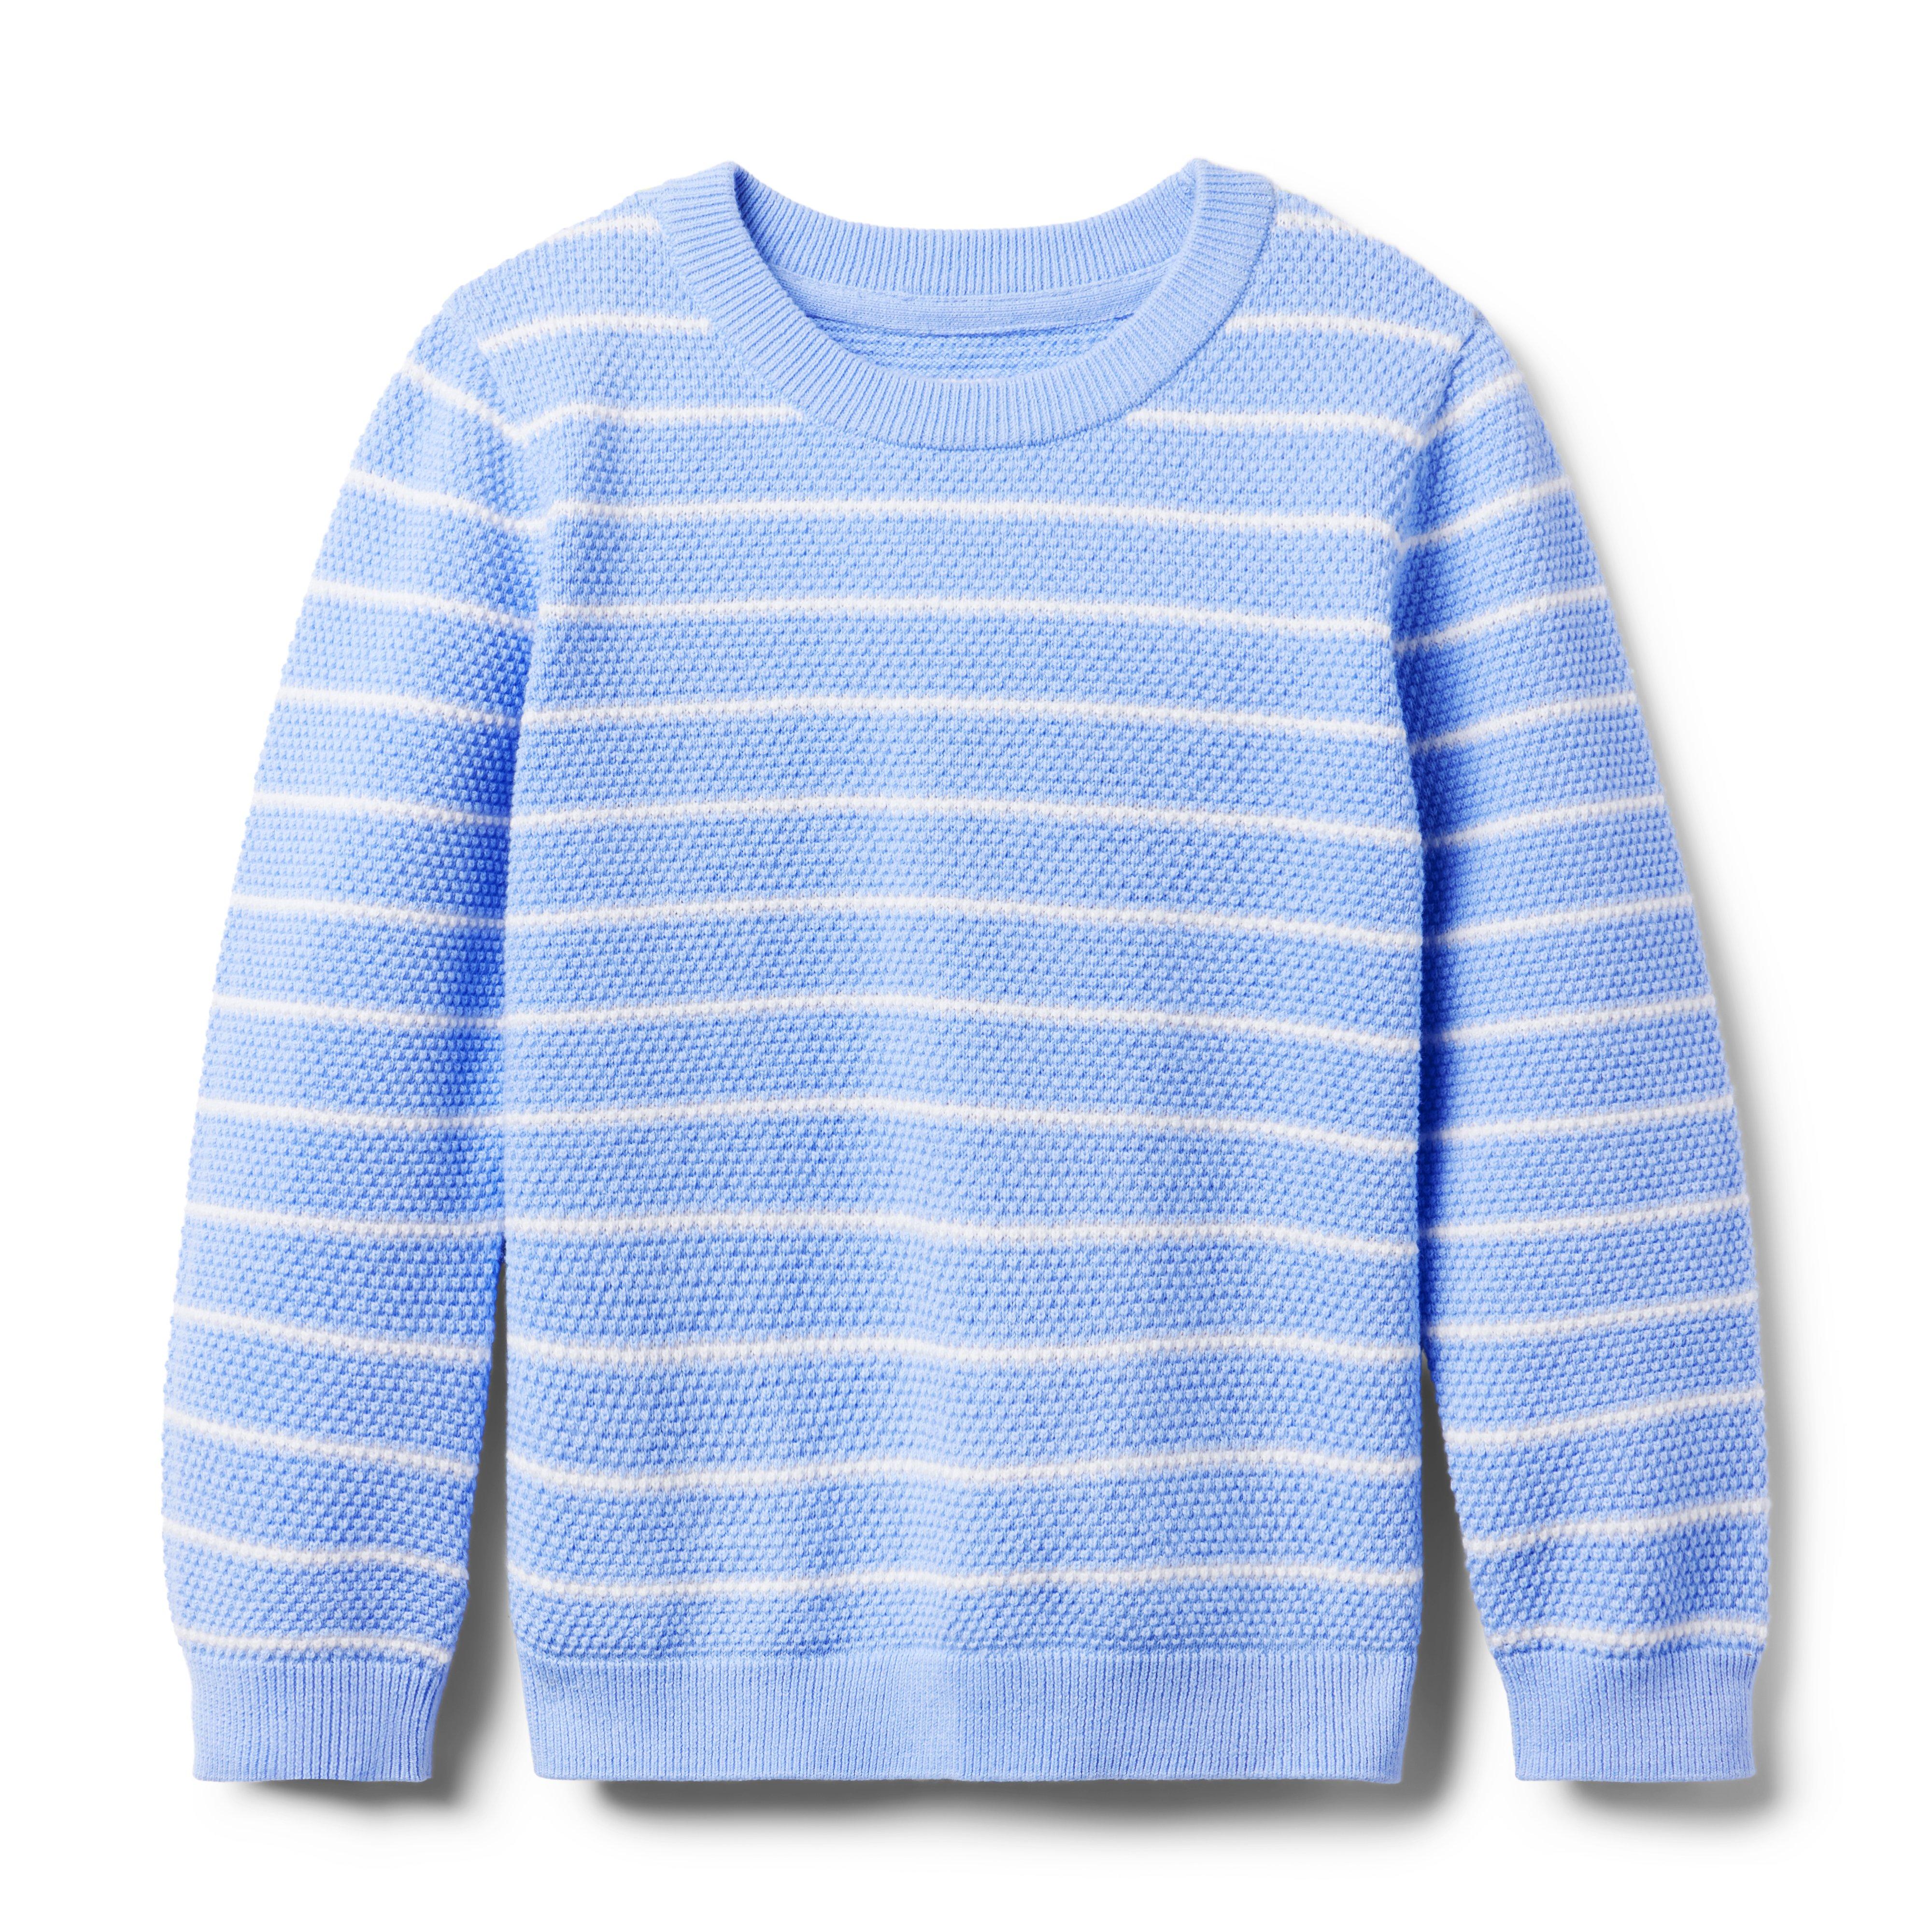 Striped Textured Sweater image number 0